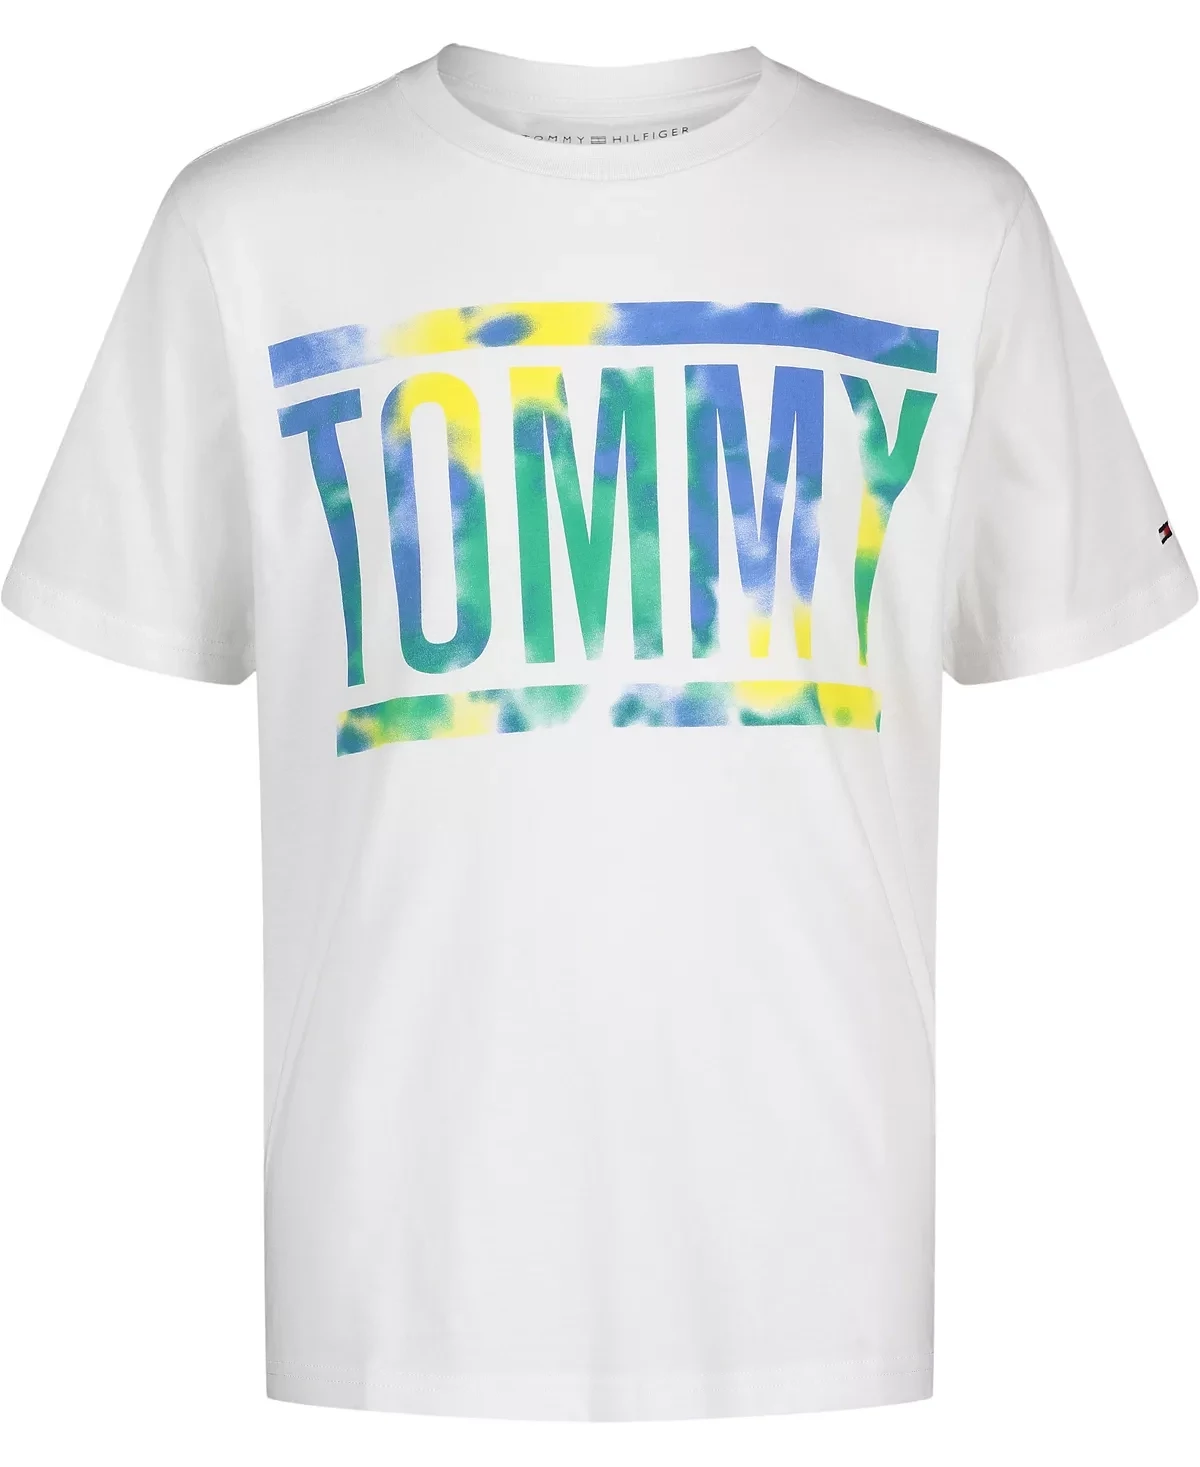 Tommy Hilfiger Toddler Boys Tommy Tie Dye Short Sleeve T-shirt - Bright White - Size 3T